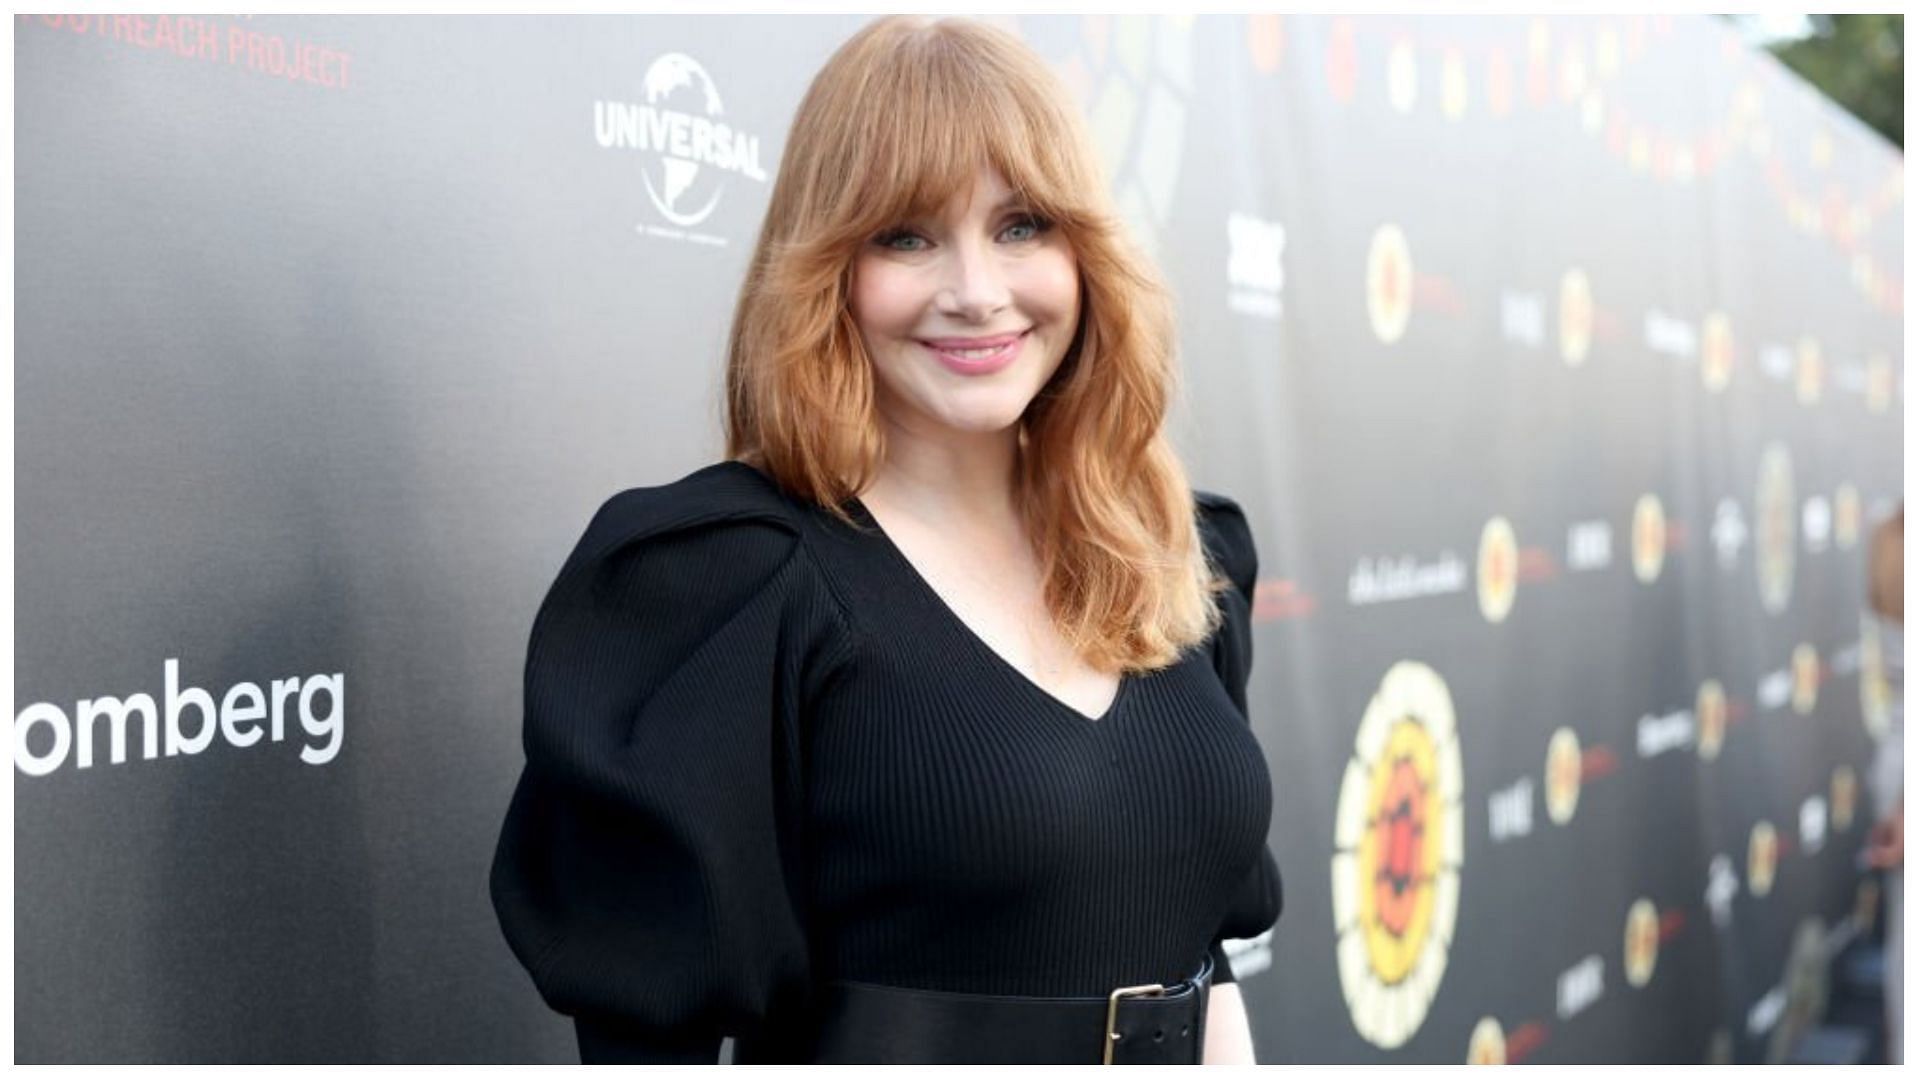 Bryce Dallas Howard revealed that she was paid less than Chris Pratt in the Jurassic World sequels (Image via Roger Kisby/Getty Images)